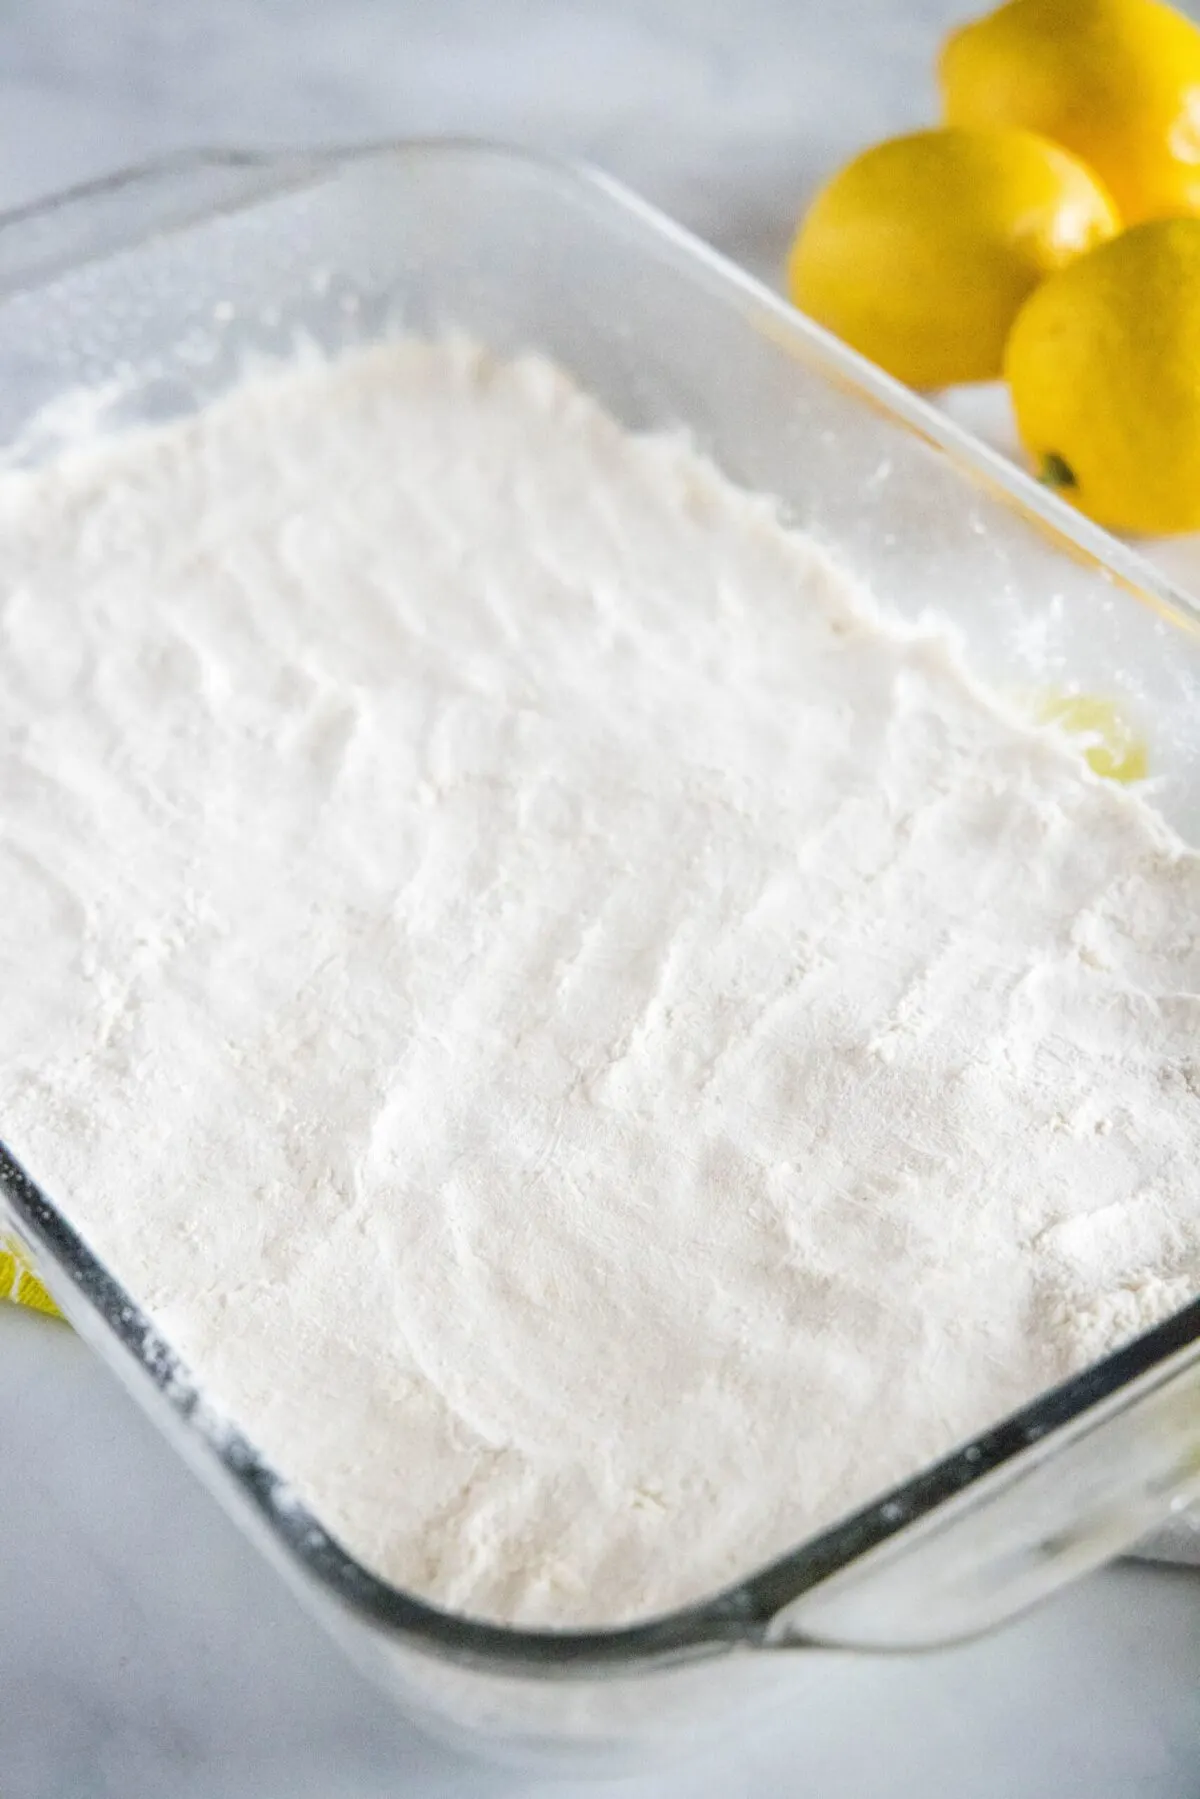 A baking pan filled with uncooked lemon bar dough